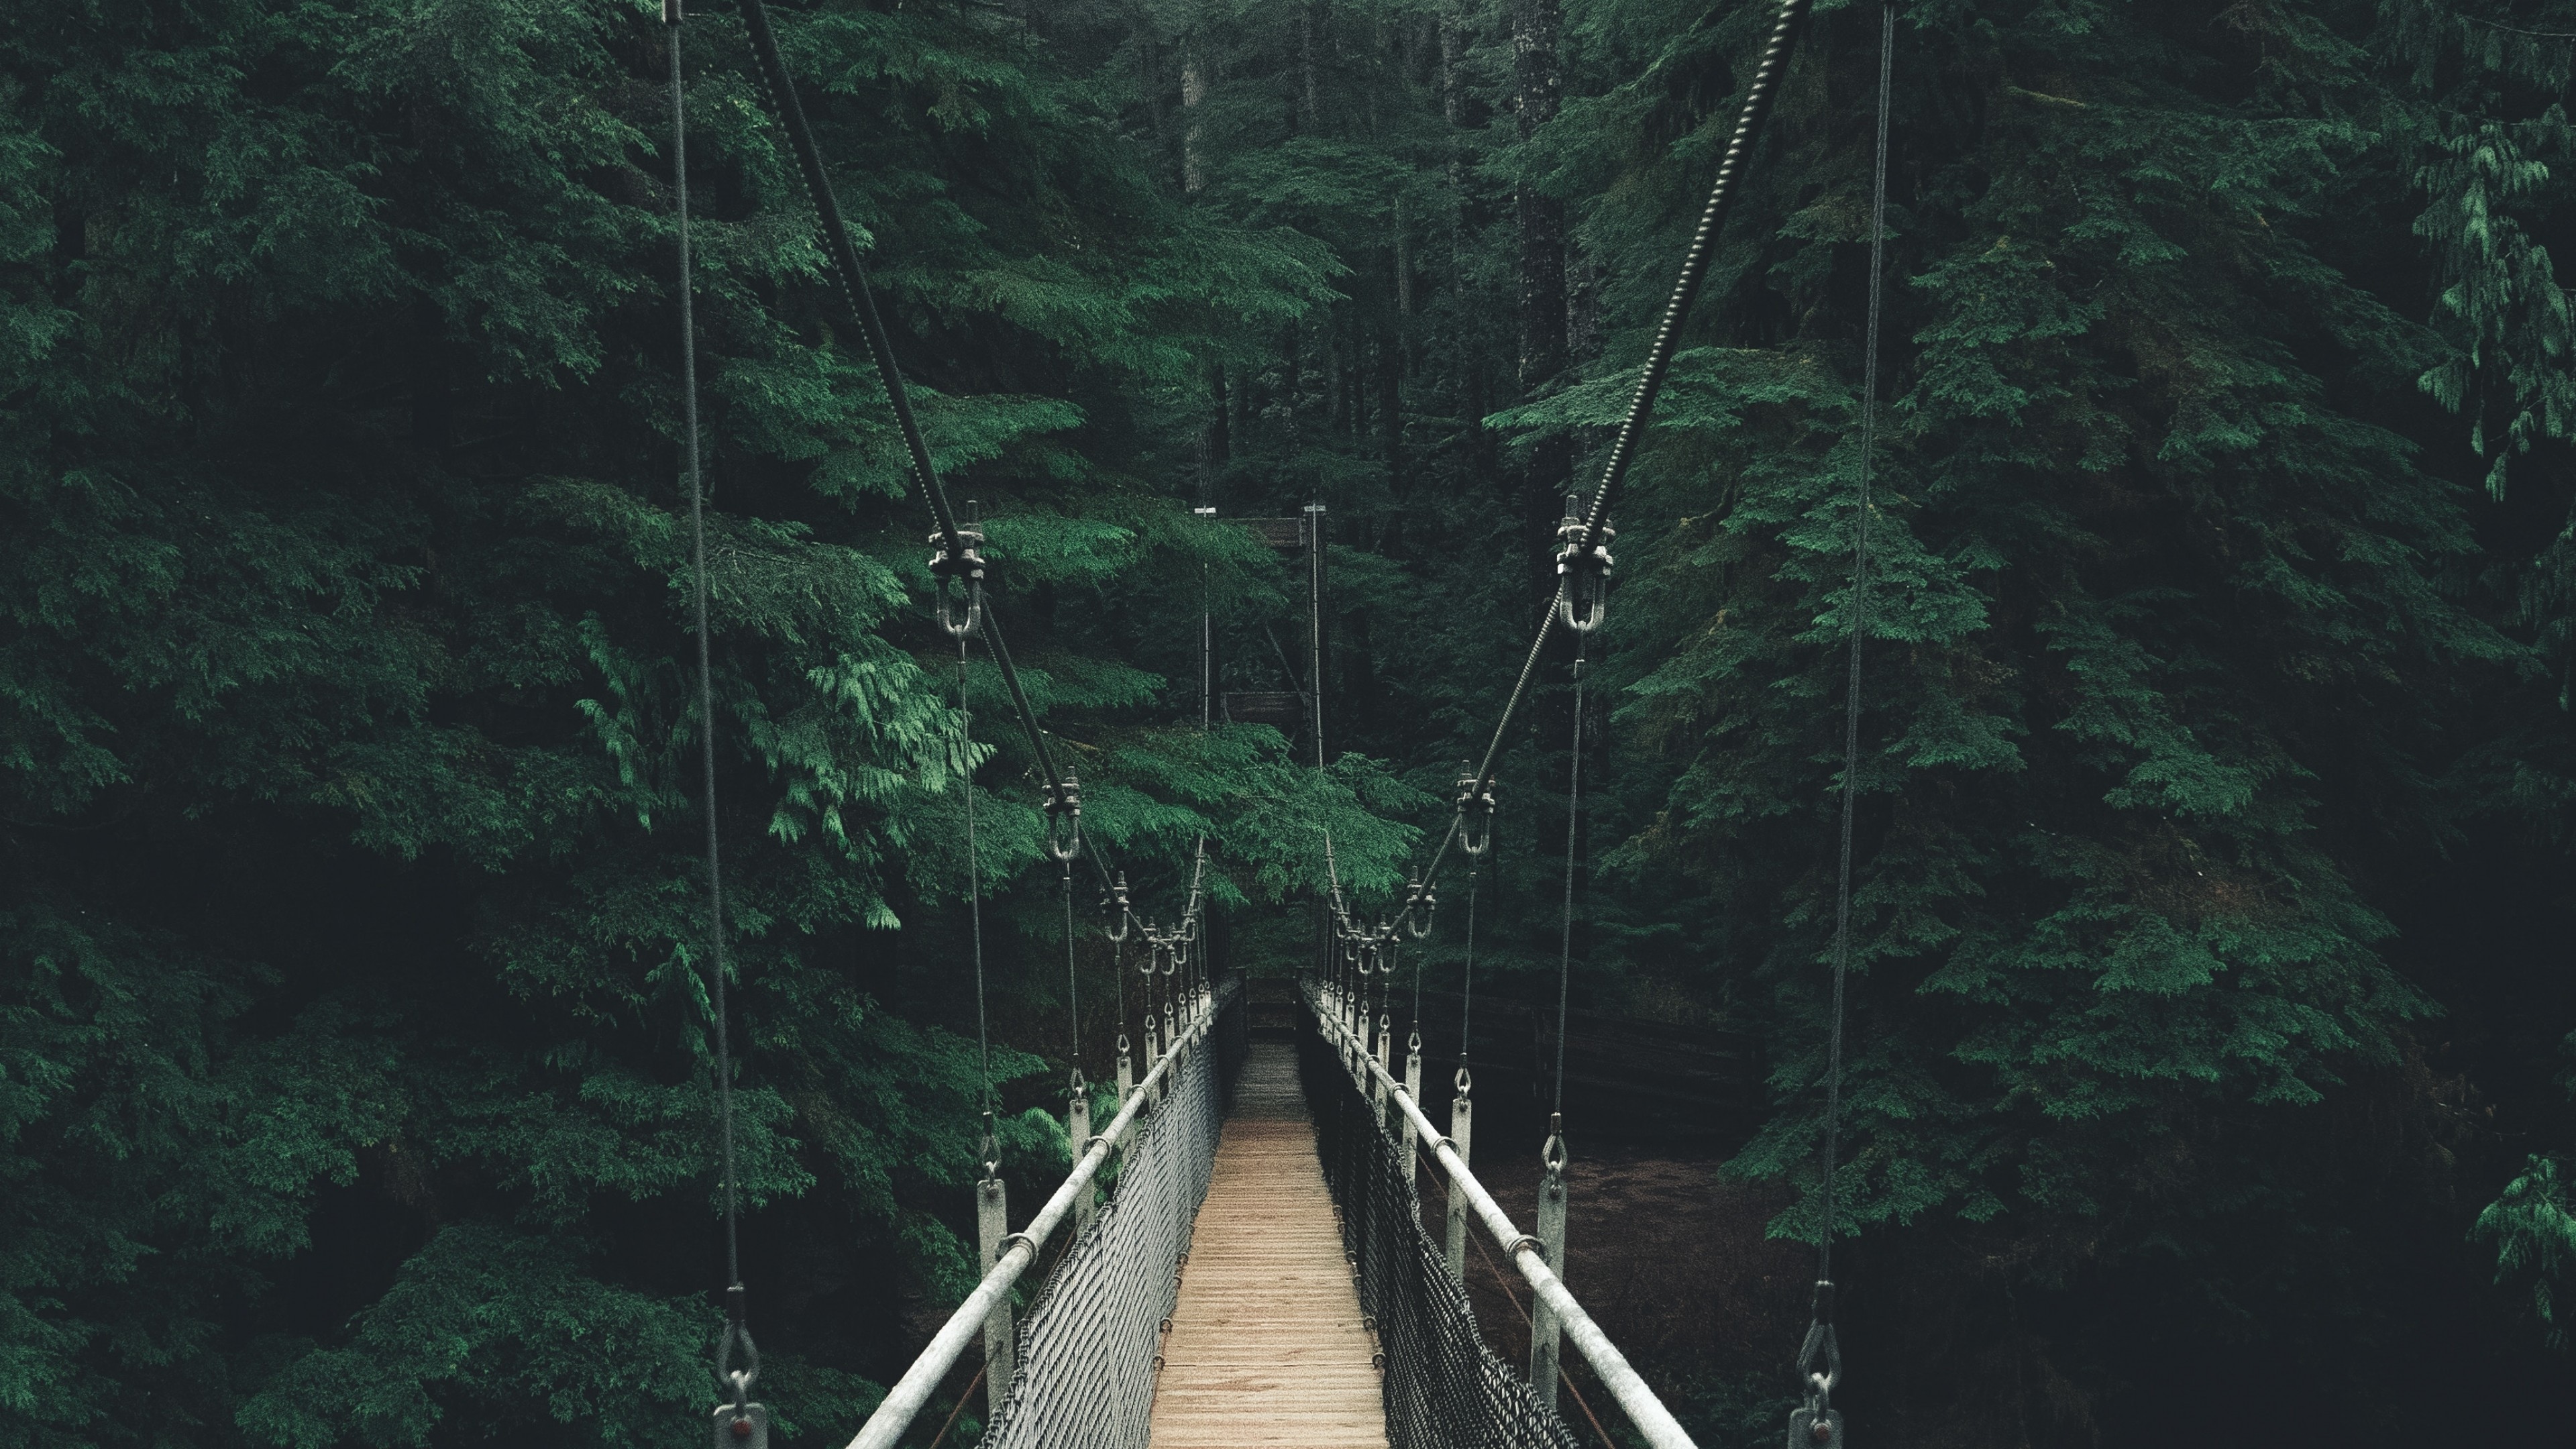 Download 3840x2160 Wooden Bridge, Forest, Trees, Rope